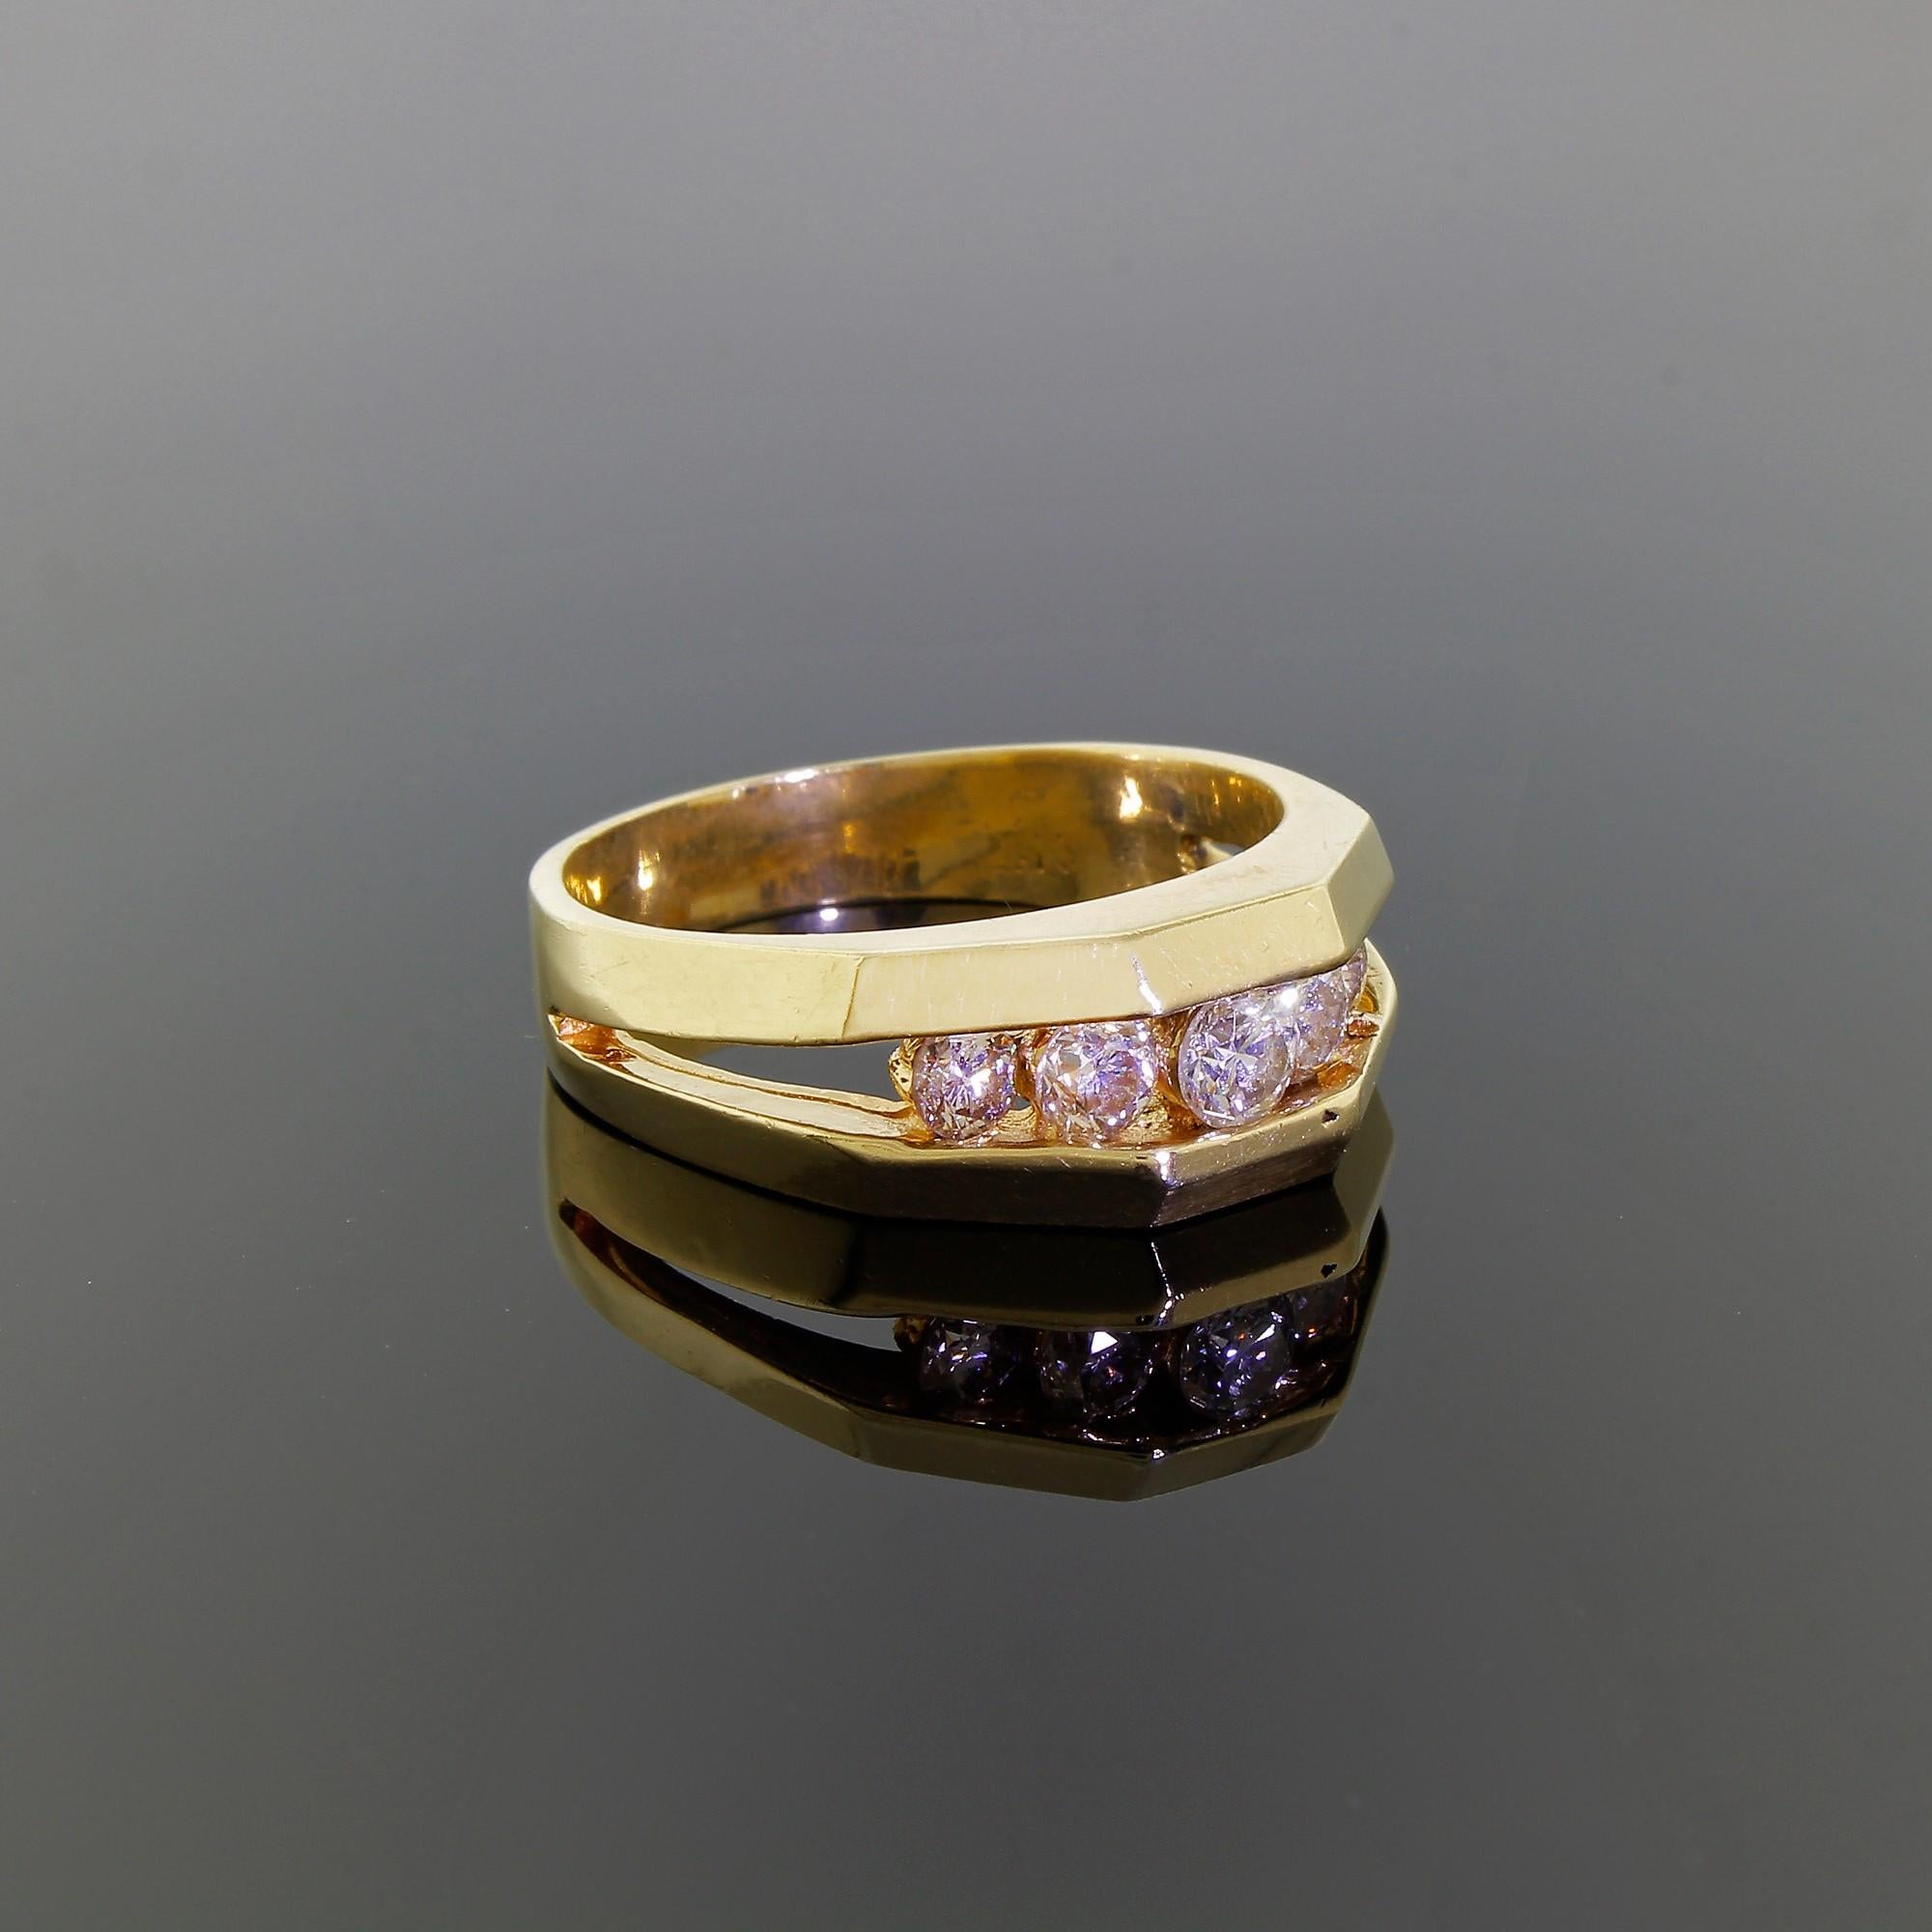 This vintage men's 14K yellow gold ring features a unique channel setting with five beautiful, sparkling diamonds that project slightly outwards from the finger when worn. This interesting design allows large quantities of light to pass through the